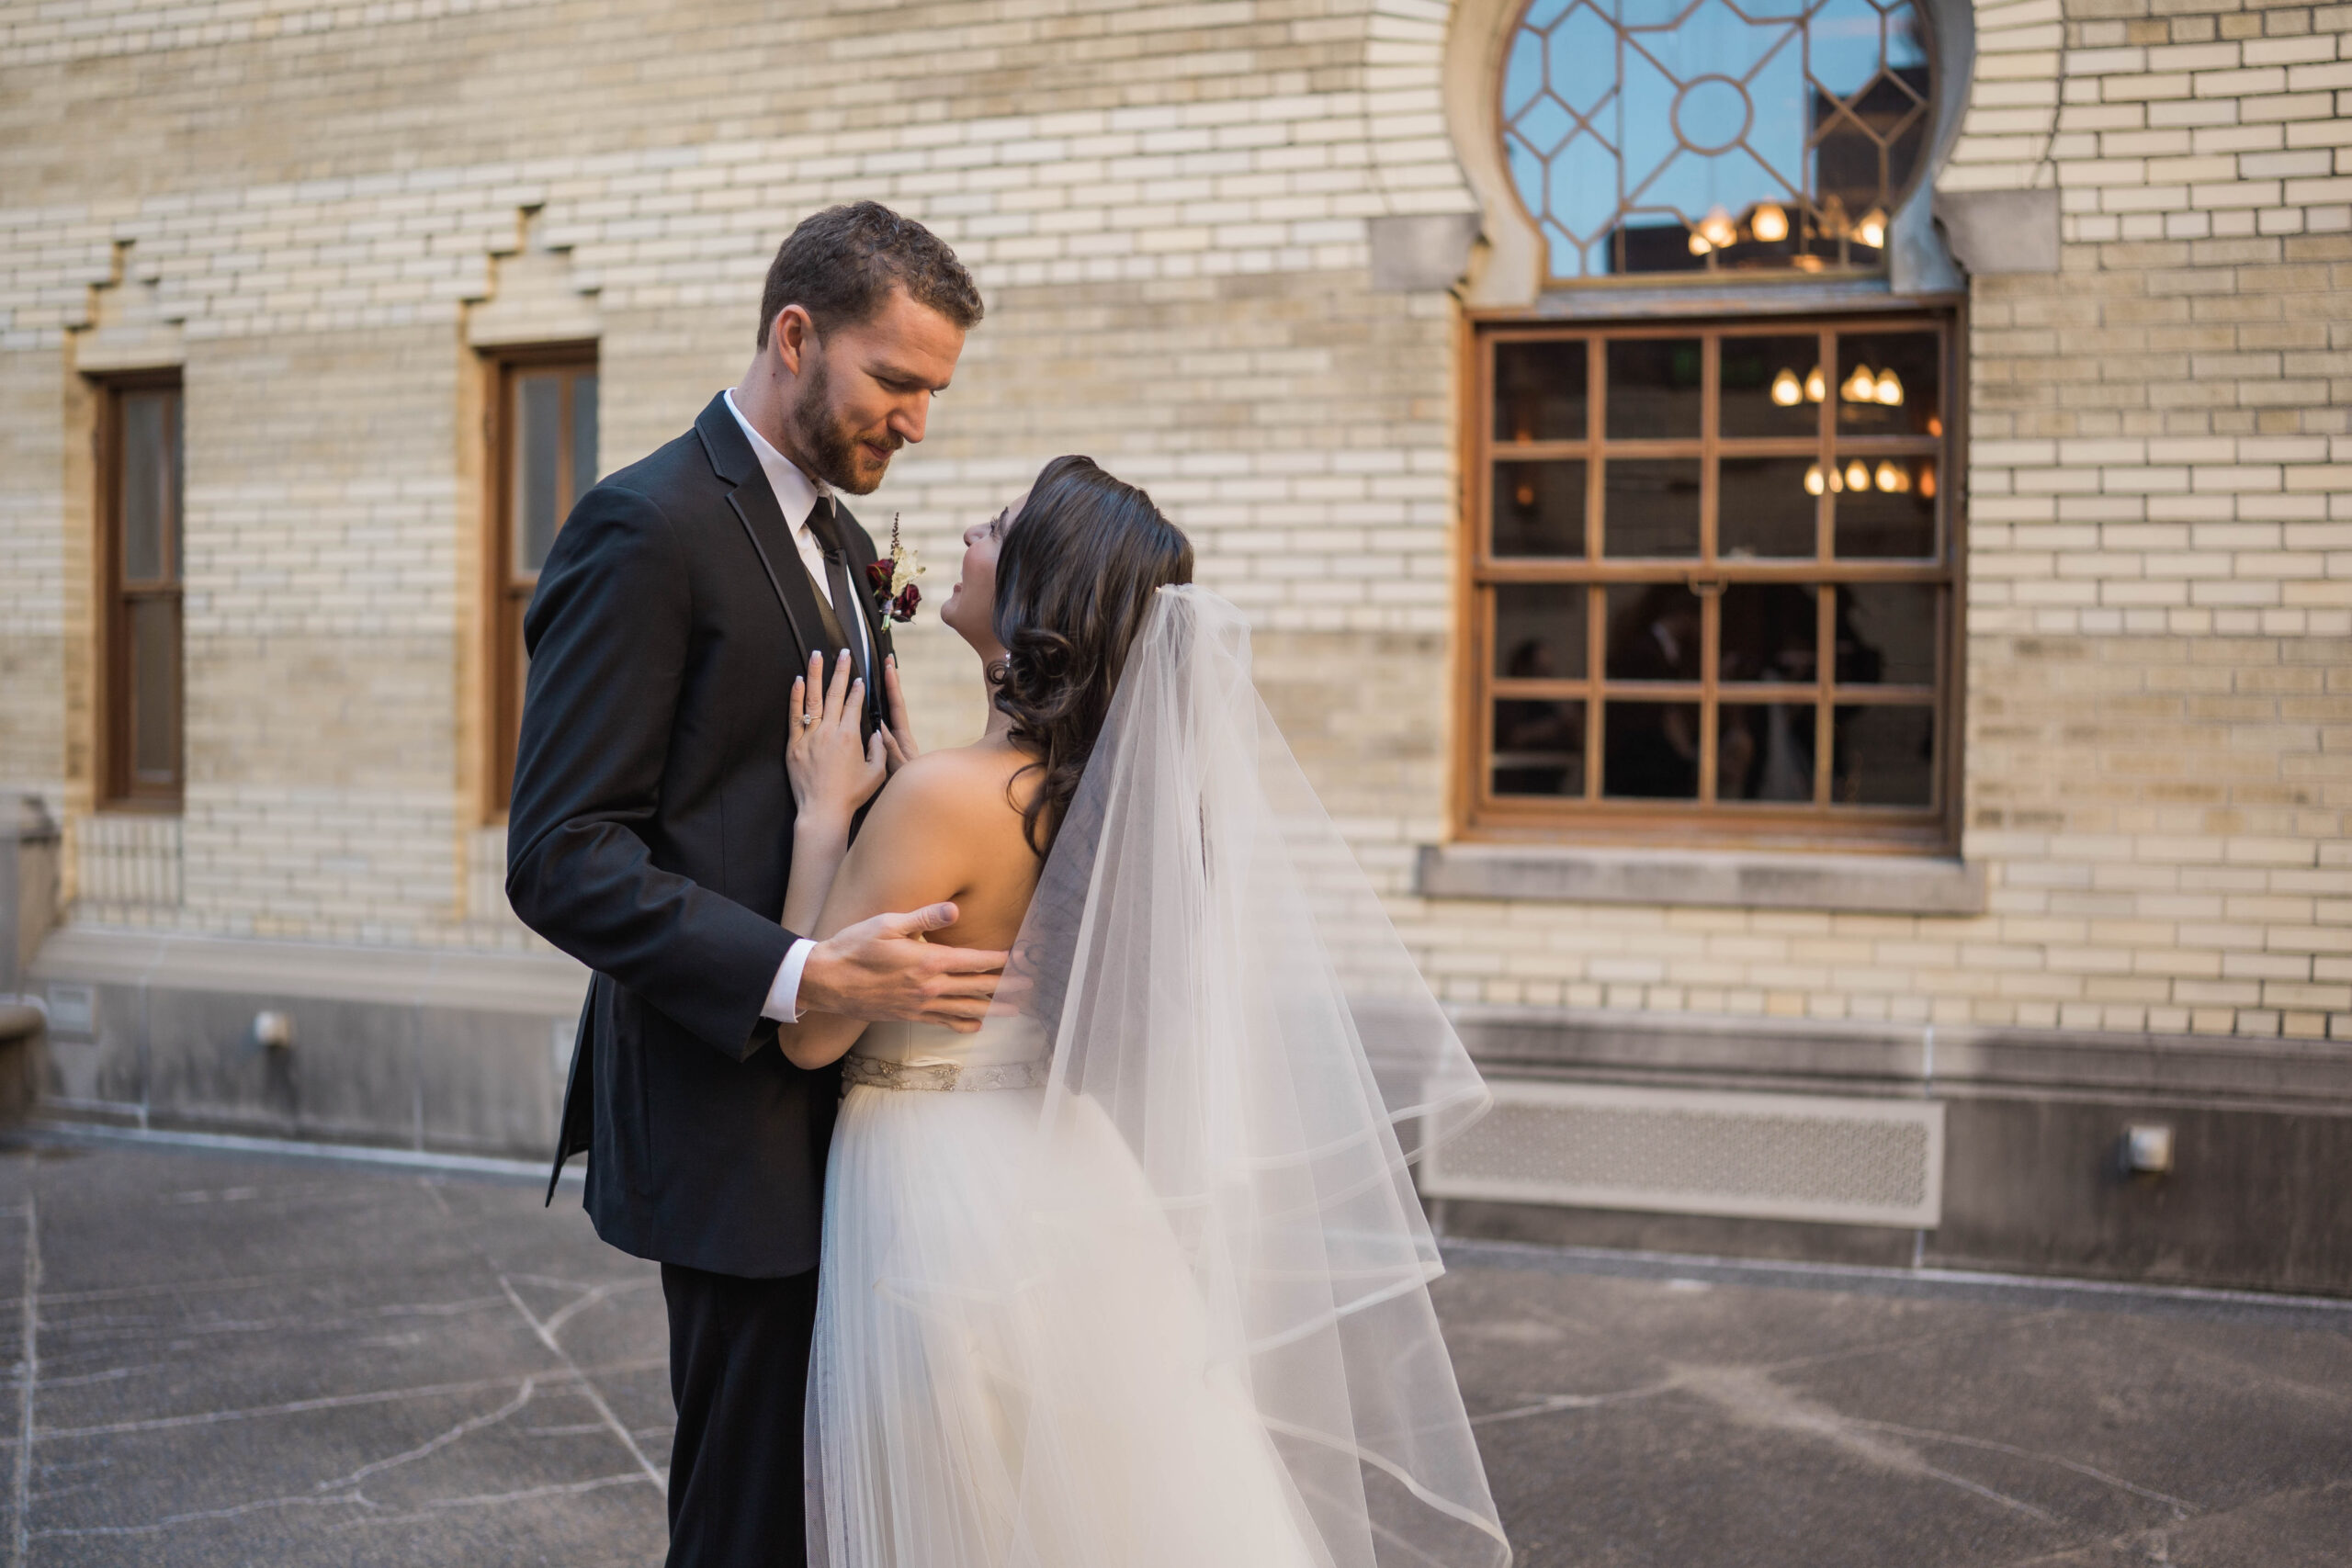 Couple shares a first look at The Fox Theatre before their wedding ceremony.